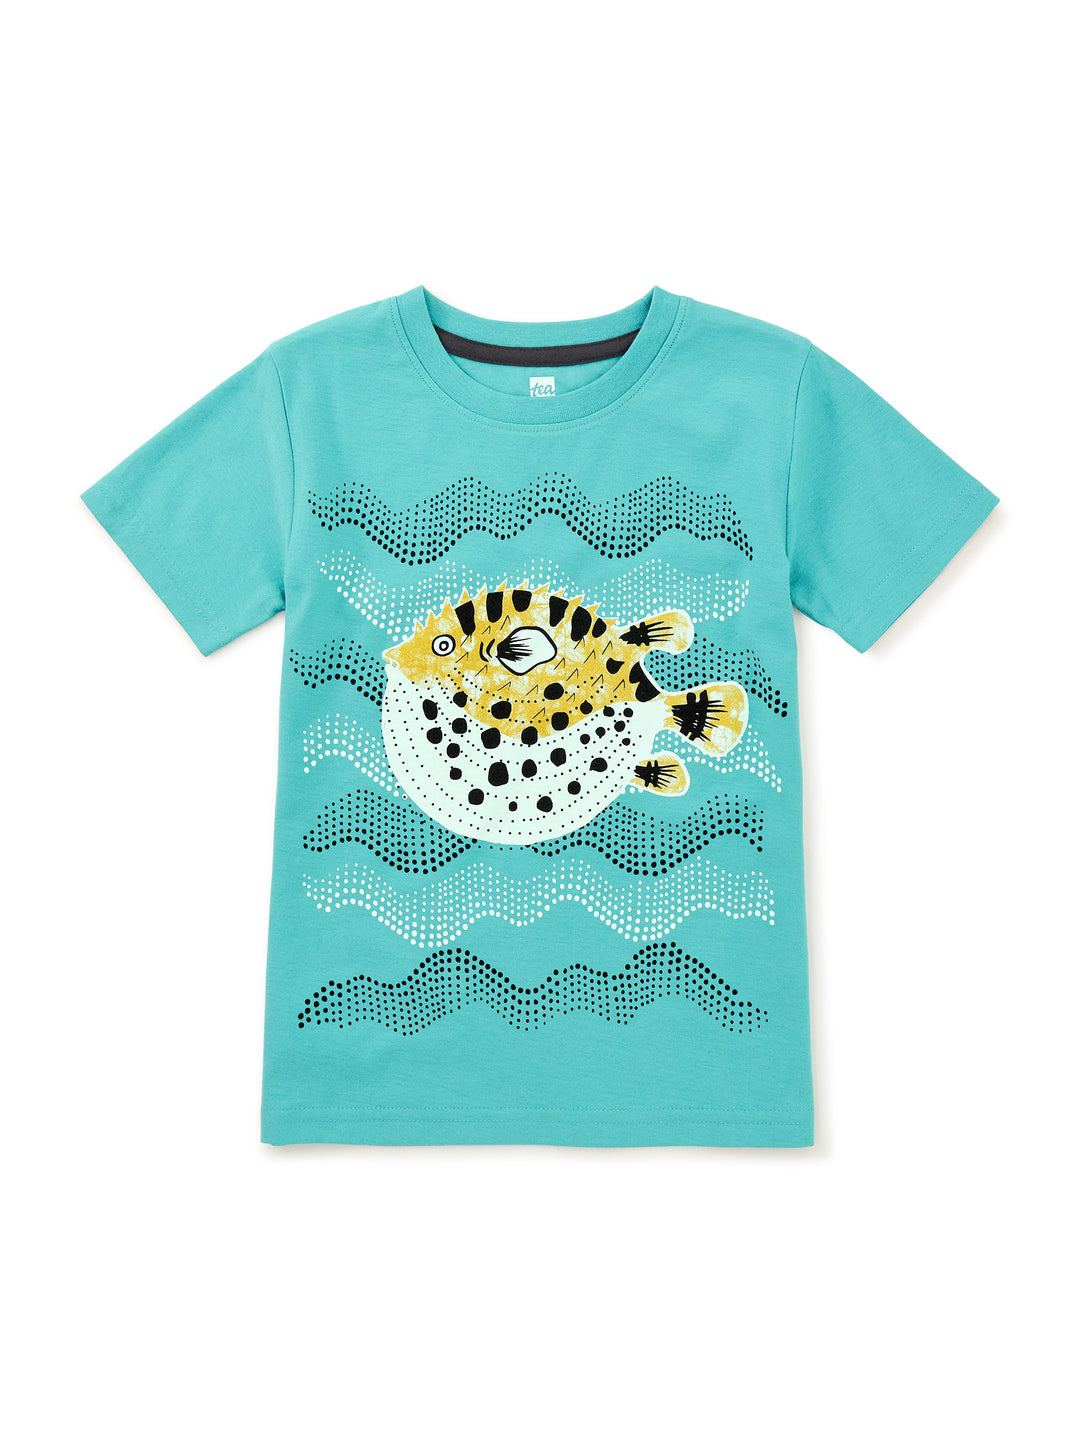 Tea Collection Puffer Fish Graphic Tee